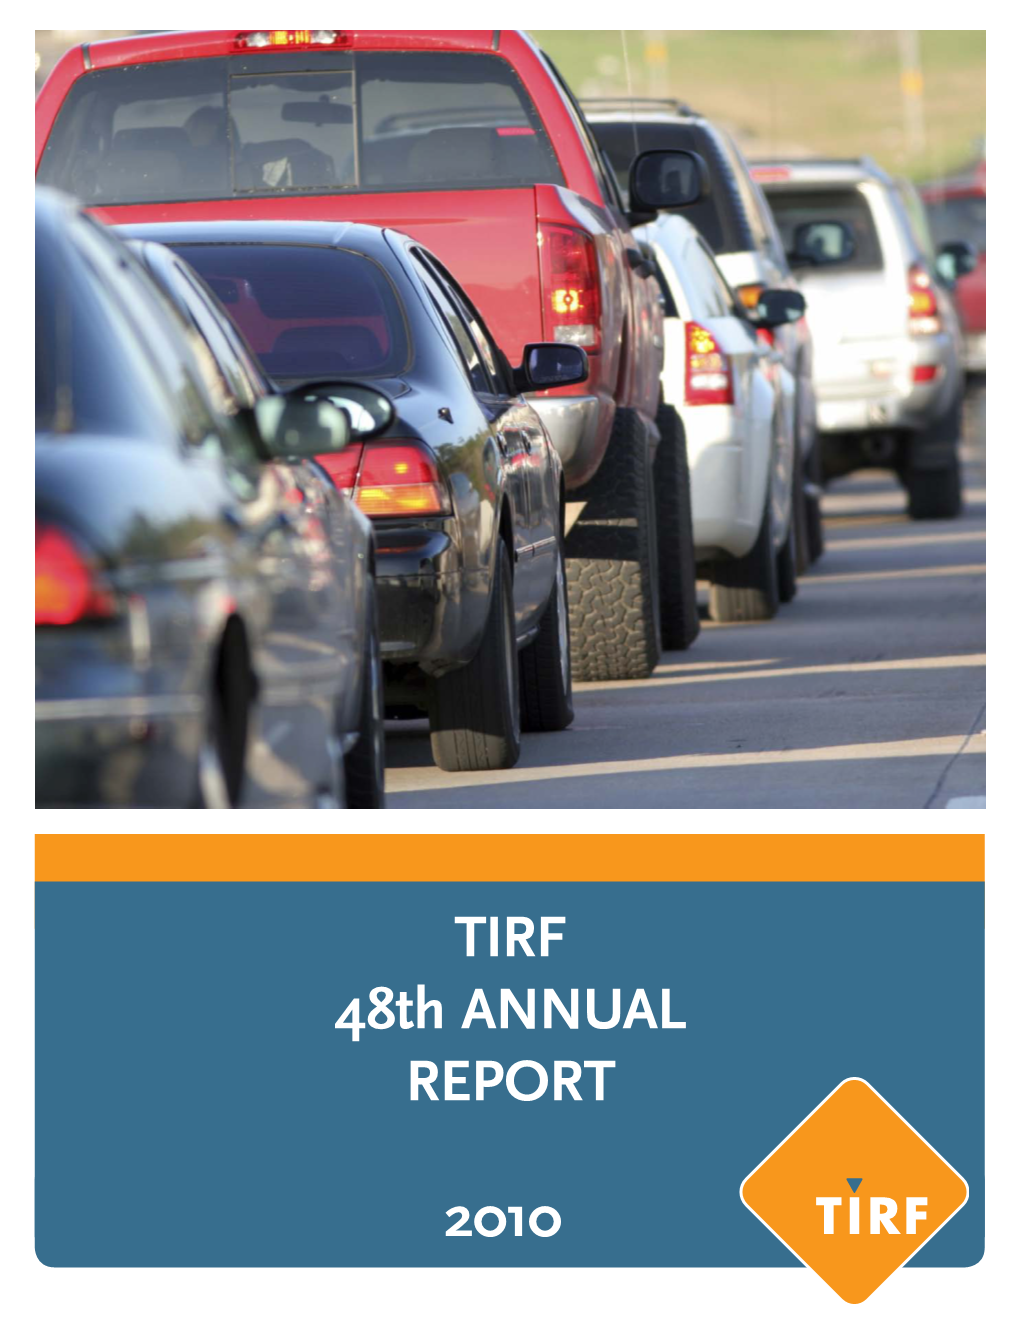 2010 TIRF 48Th ANNUAL REPORT